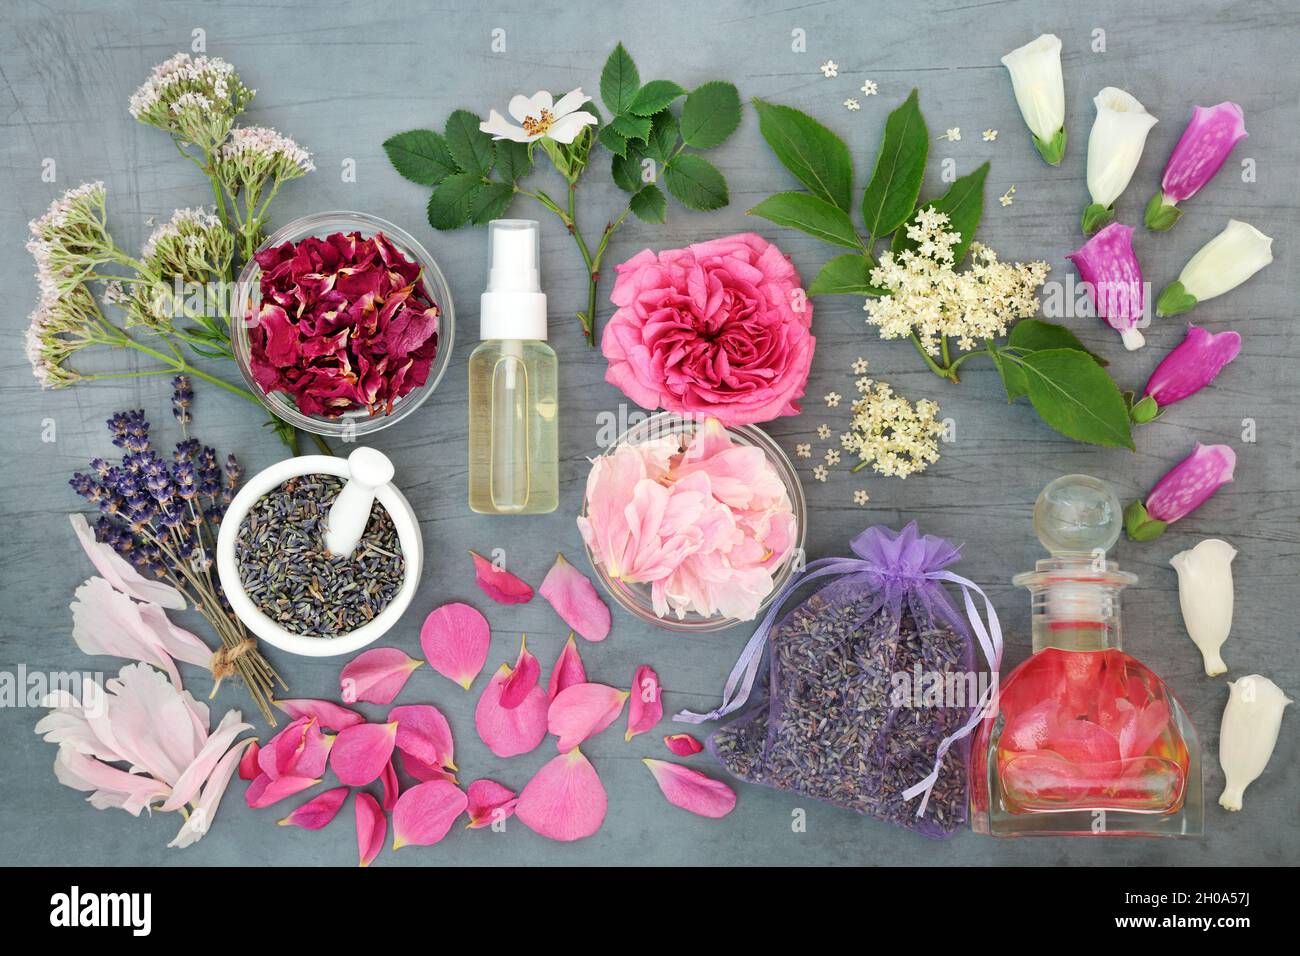 Healing herbs and flowers for natural herbal plant medicine remedies and essential oil preparation. Health and wellness concept. Stock Photo